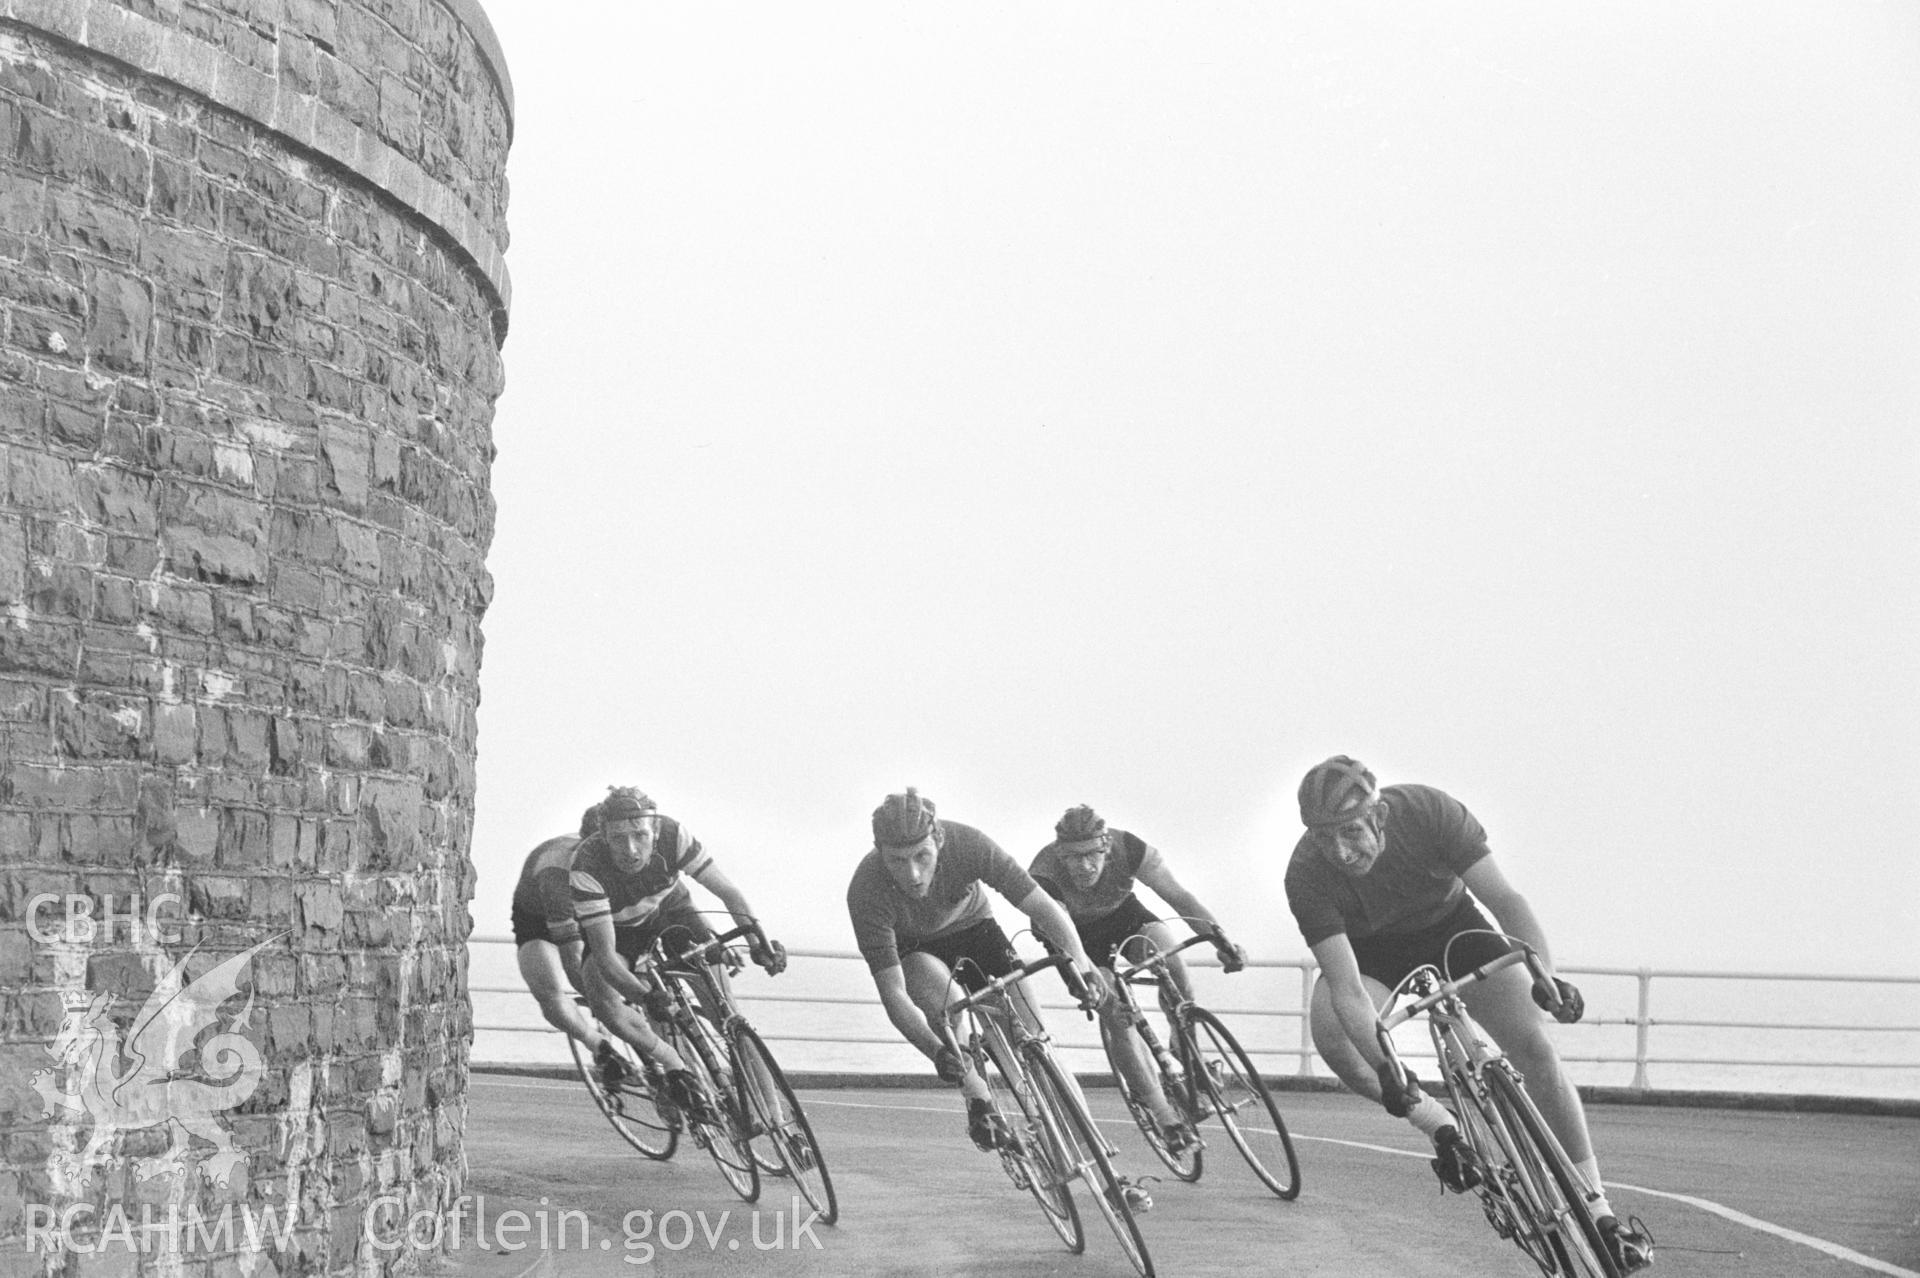 Digital copy of a black and white negative showing the Aberystwyth stage of the Milk Race.